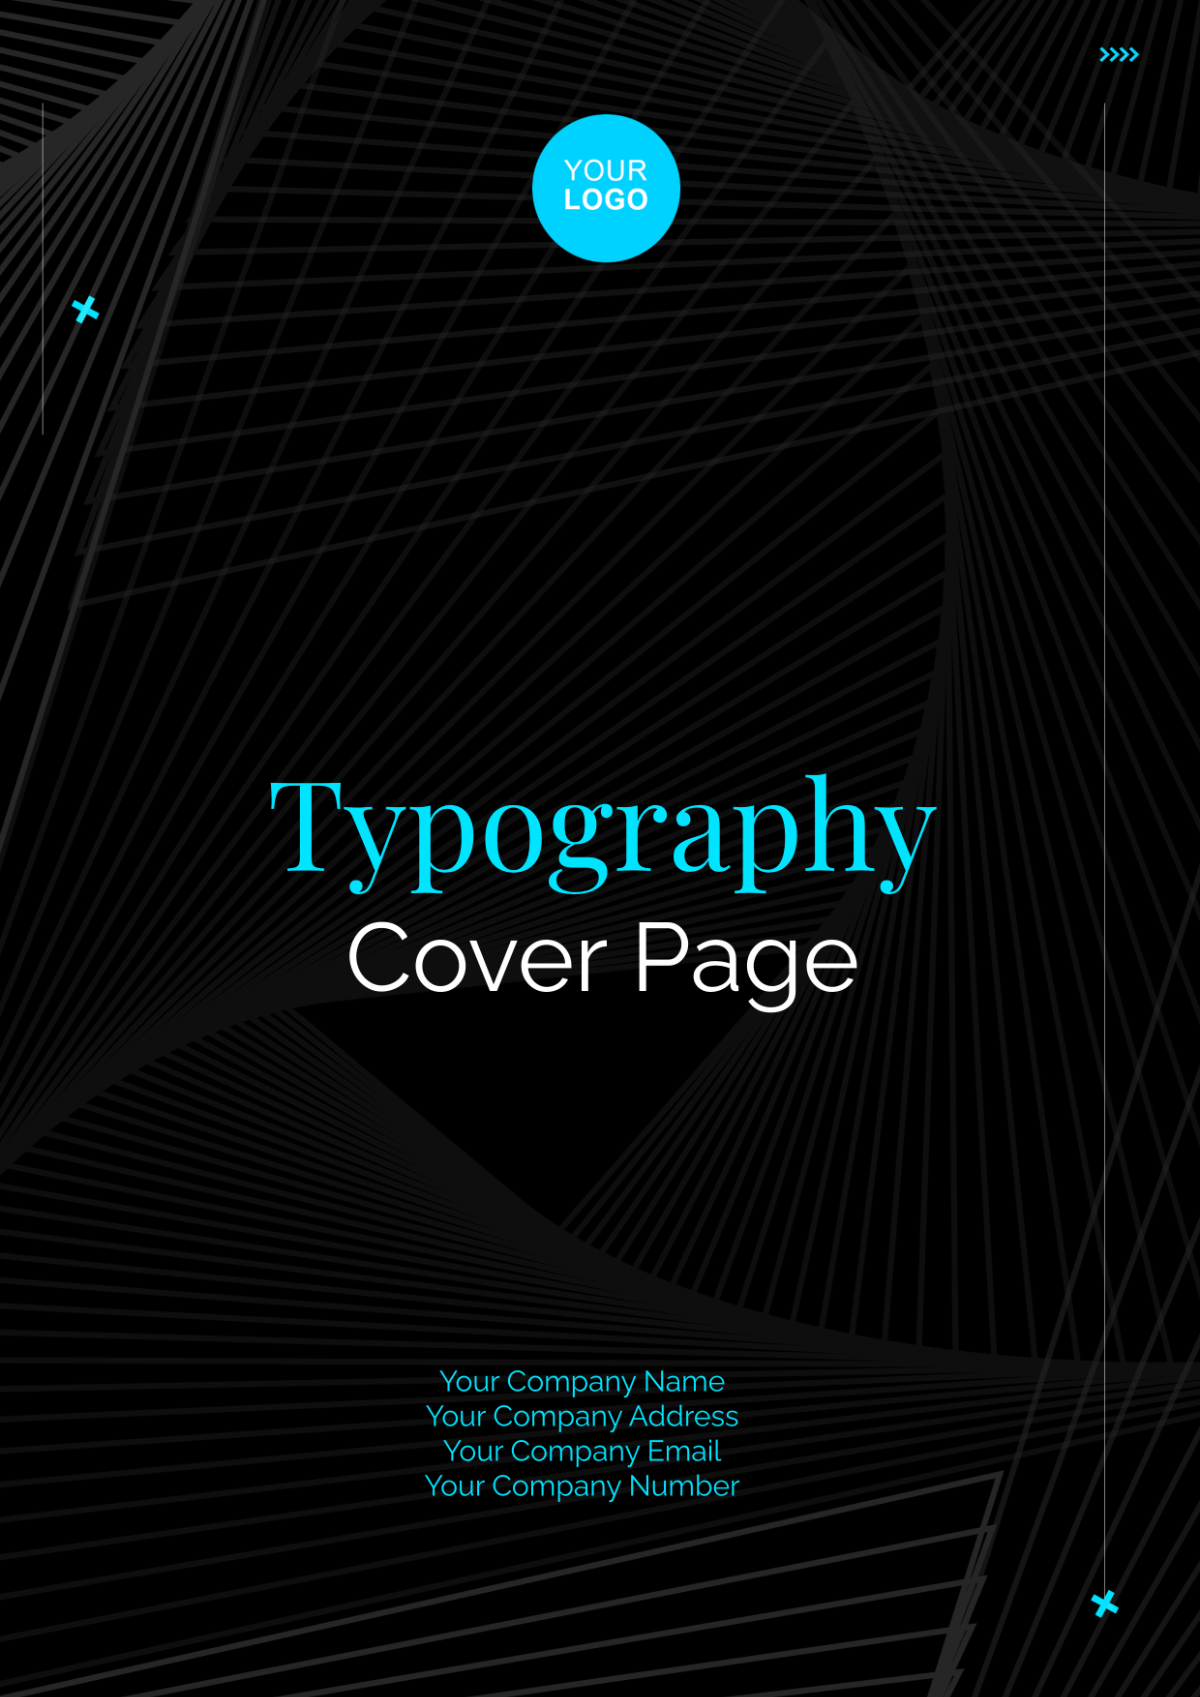 Typography Cover Page Design